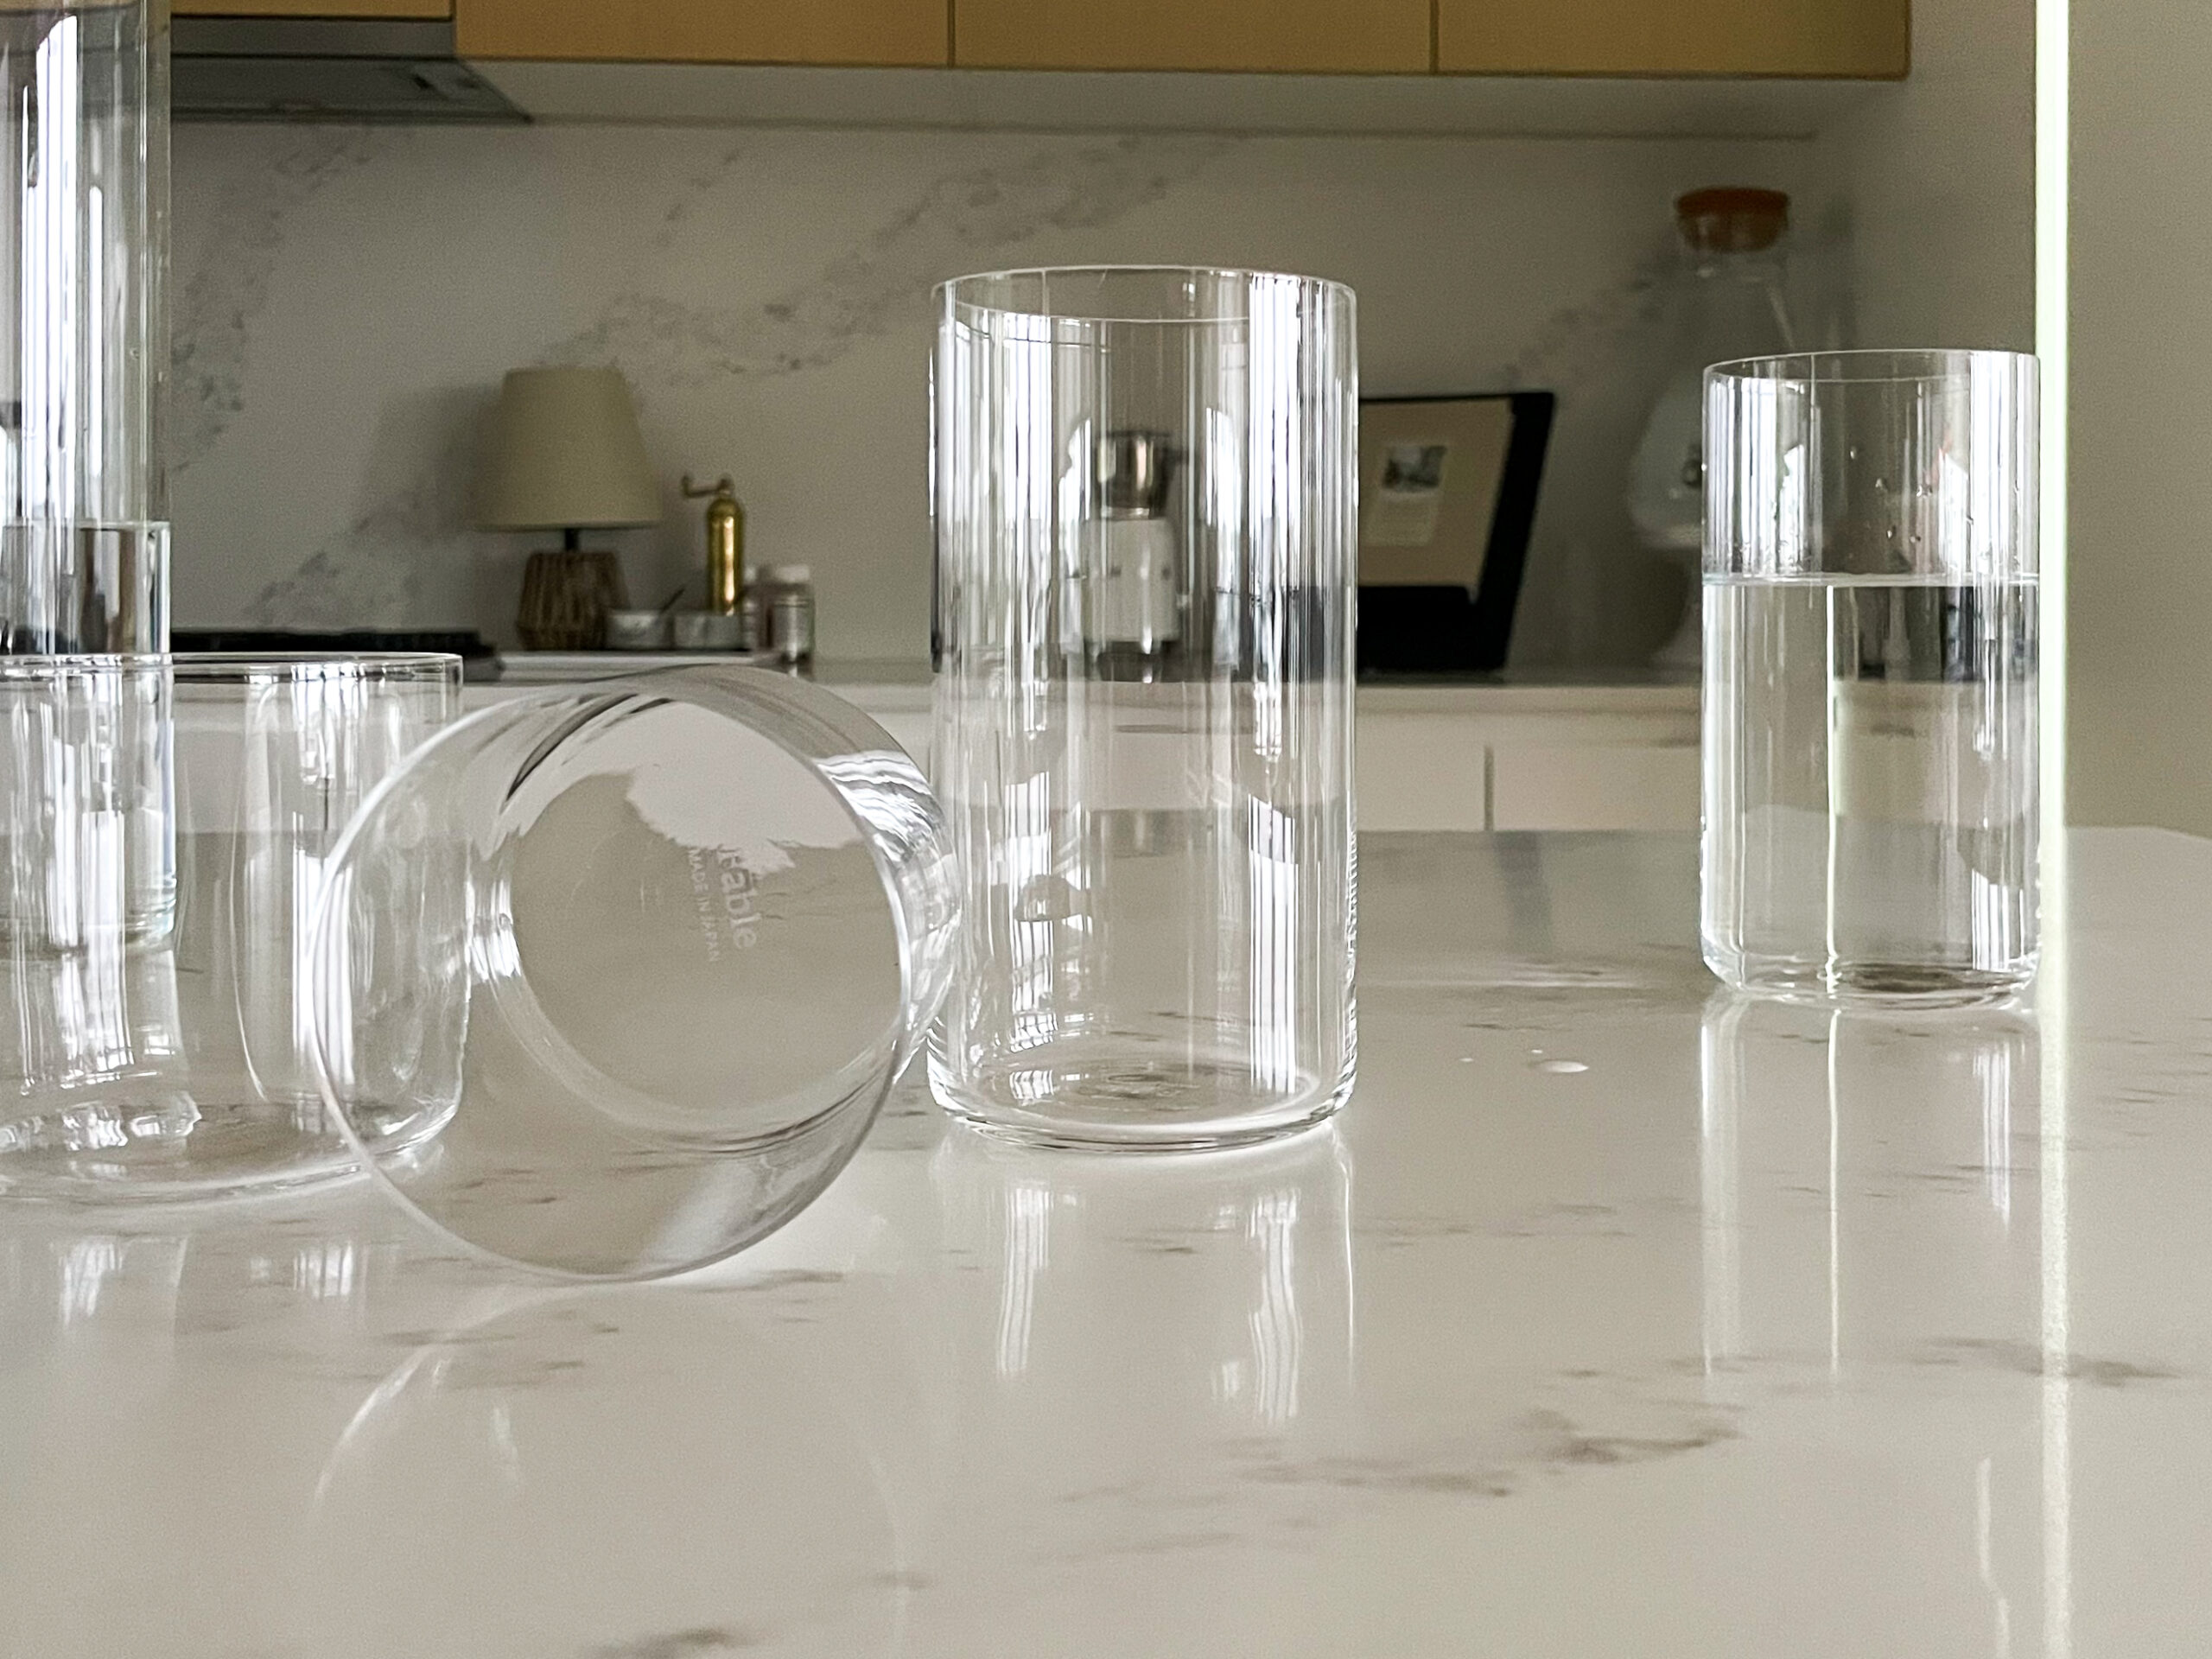 Fable Glassware sitting on a kitchen counter ready for a Fable glassware review